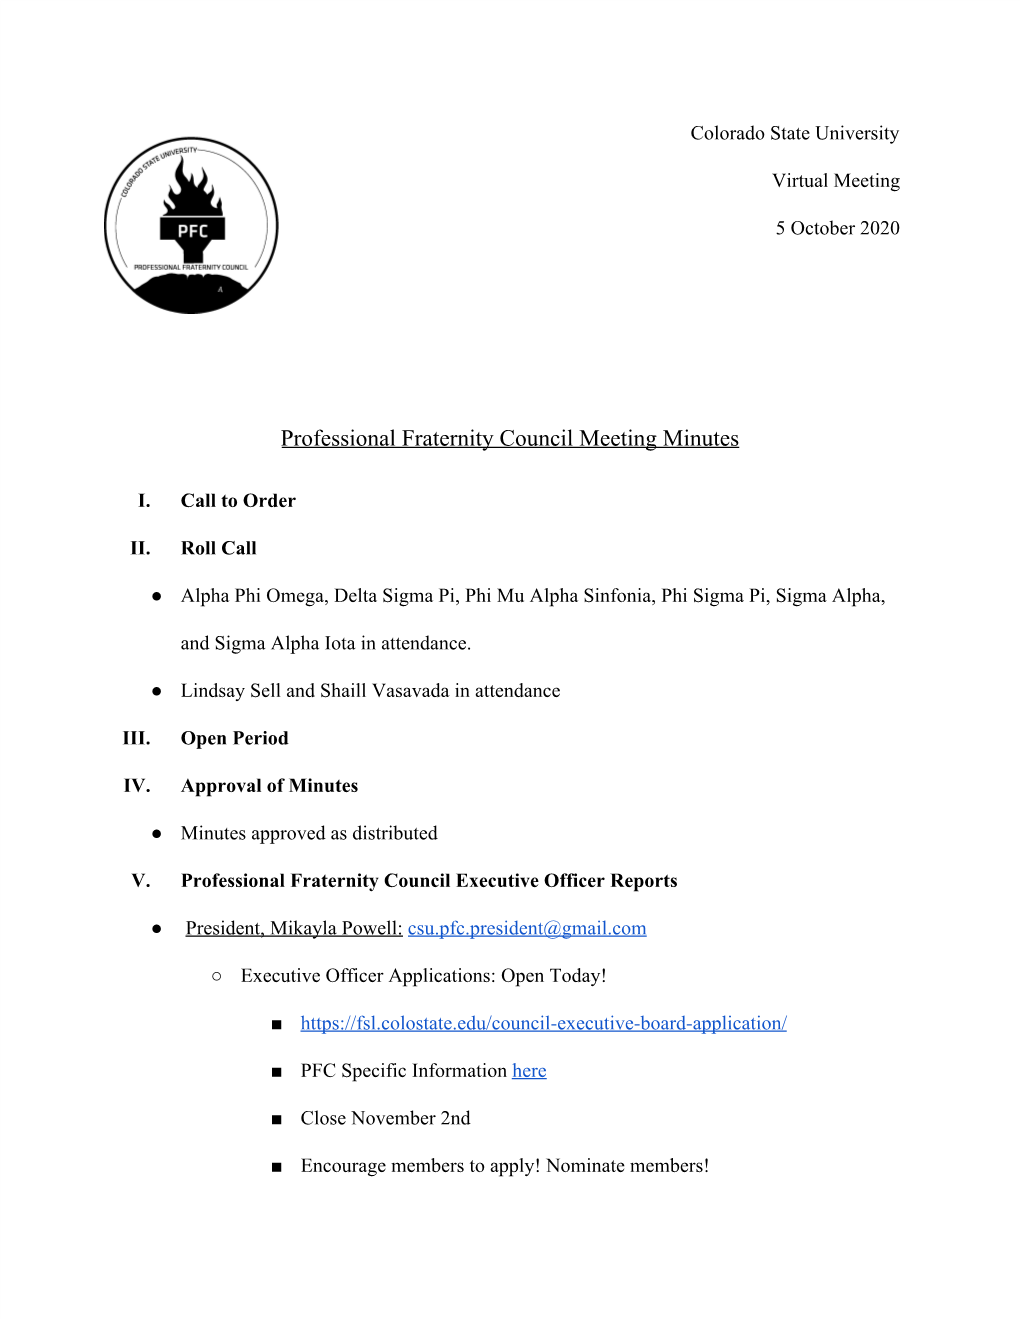 Professional Fraternity Council Meeting Minutes